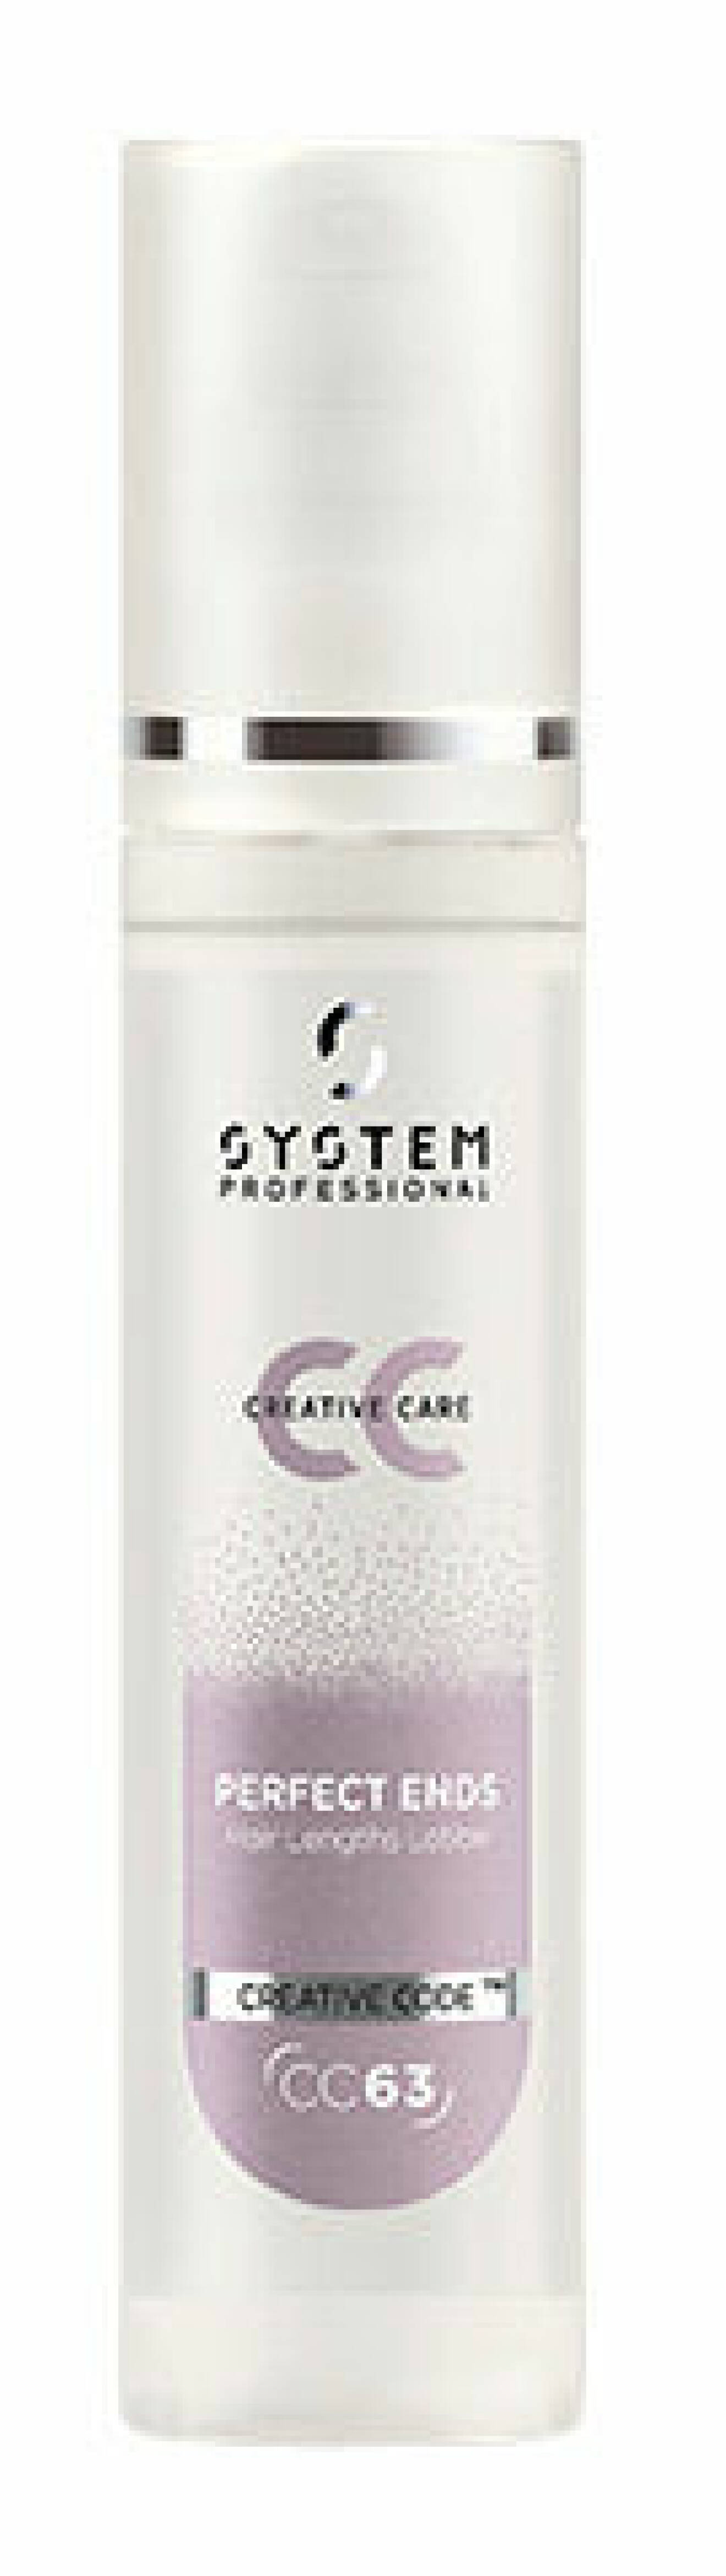 System Professional Creative Care Perfect Ends